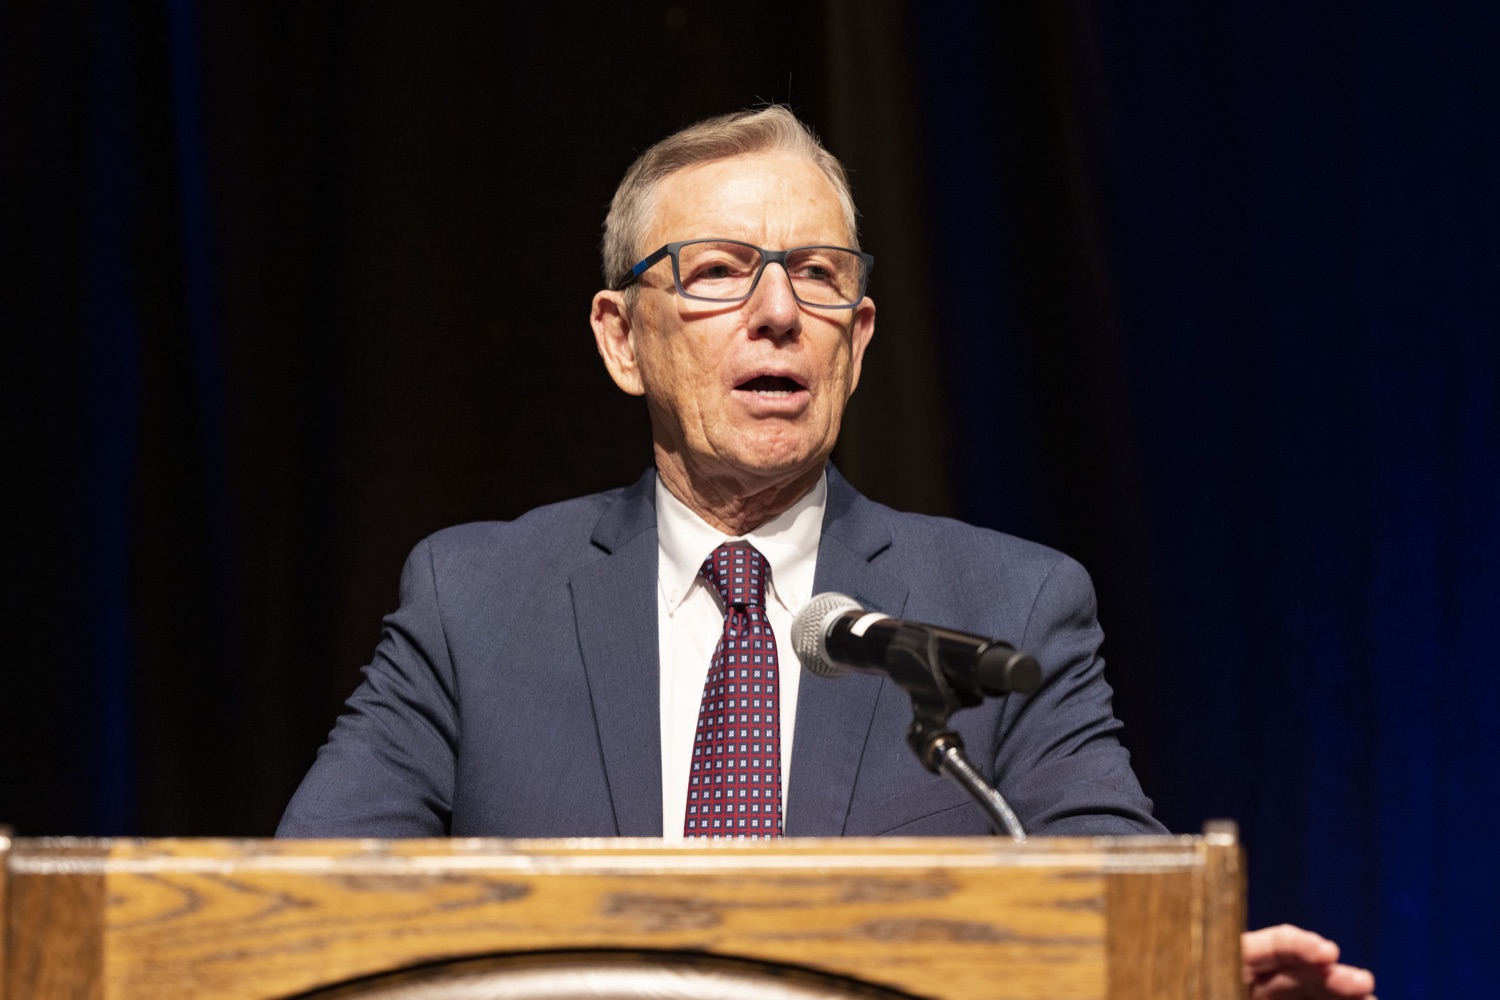 PDE Special Assistant to the Acting Secretary David Volkman makes opening remarks at the 2023 Pennsylvania Teacher of the Year awards, in Hershey, PA on December 5, 2022.<br><a href="https://filesource.amperwave.net/commonwealthofpa/photo/22364_pde_teacherOfTheYear_02.jpg" target="_blank">⇣ Download Photo</a>